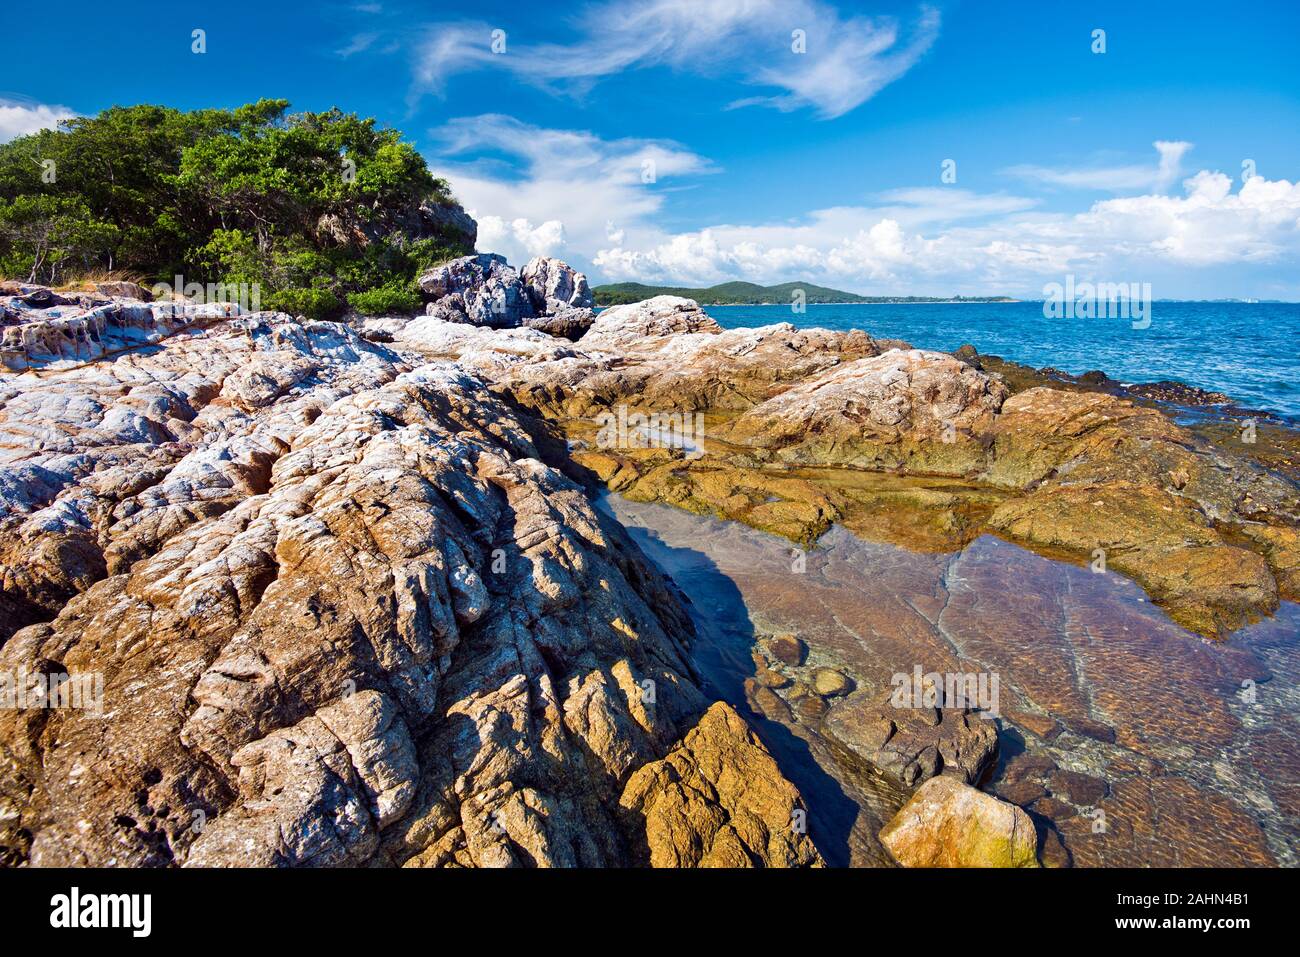 Southern Coastline wild landscape in Ko Samet island, textured stones of the coast are at foreground, Thailand Stock Photo